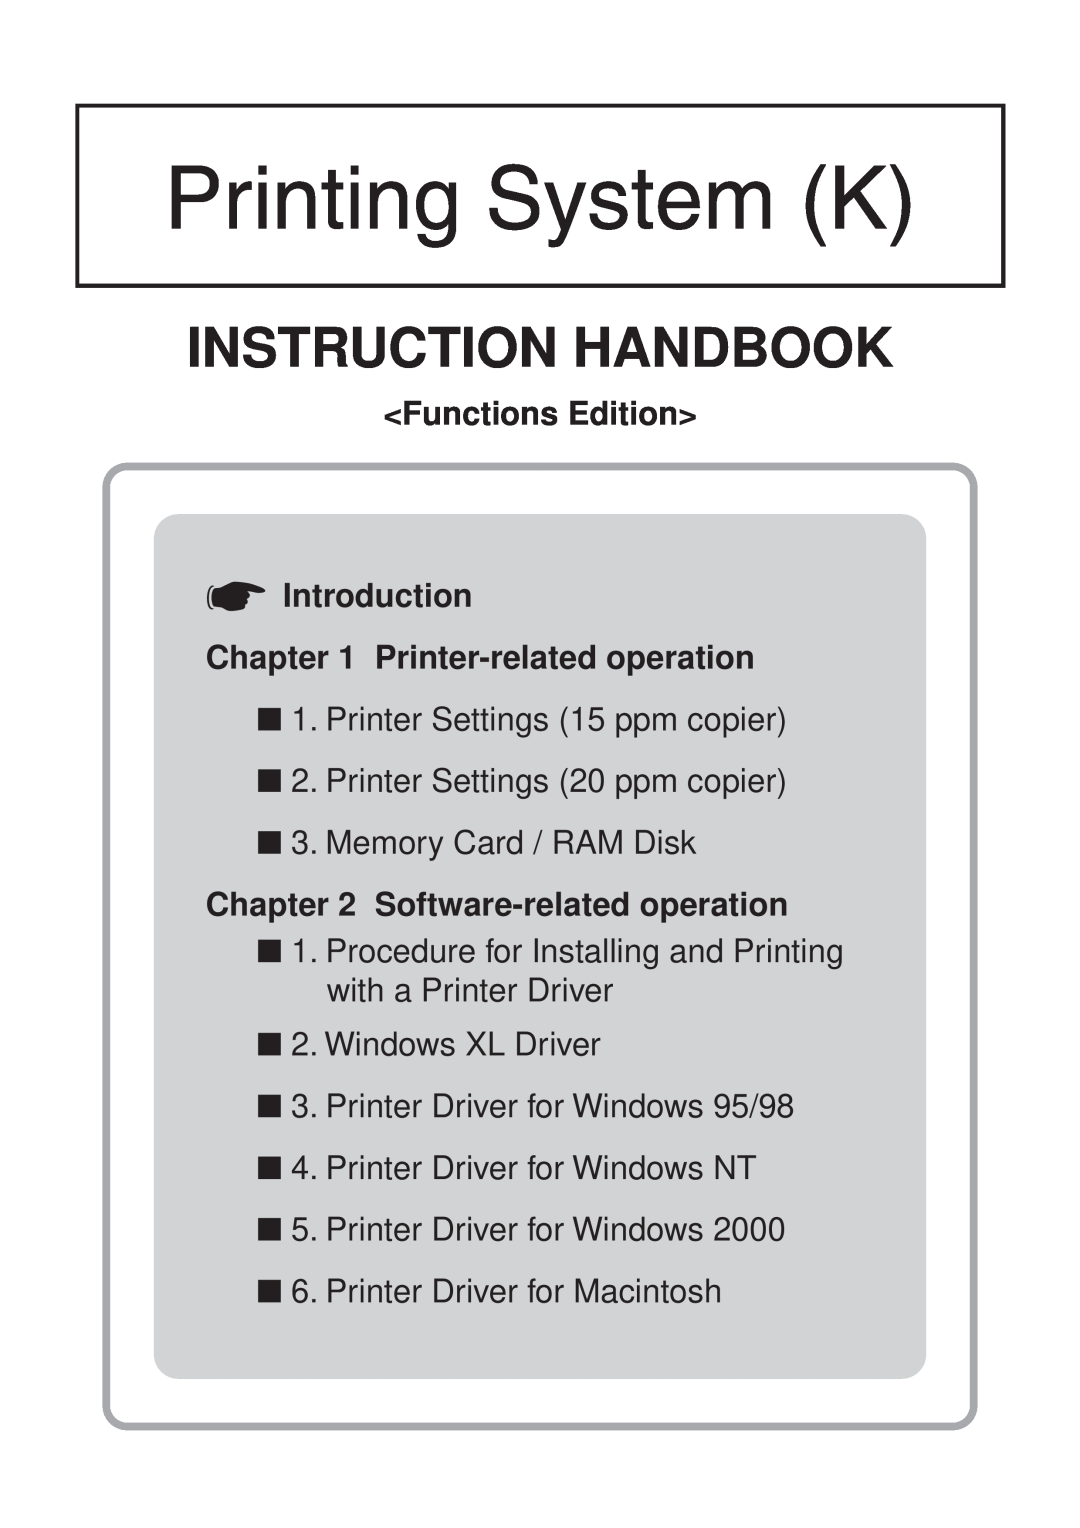 IBM Printing System manual Instruction Handbook, Functions Edition Introduction Printer-related operation 